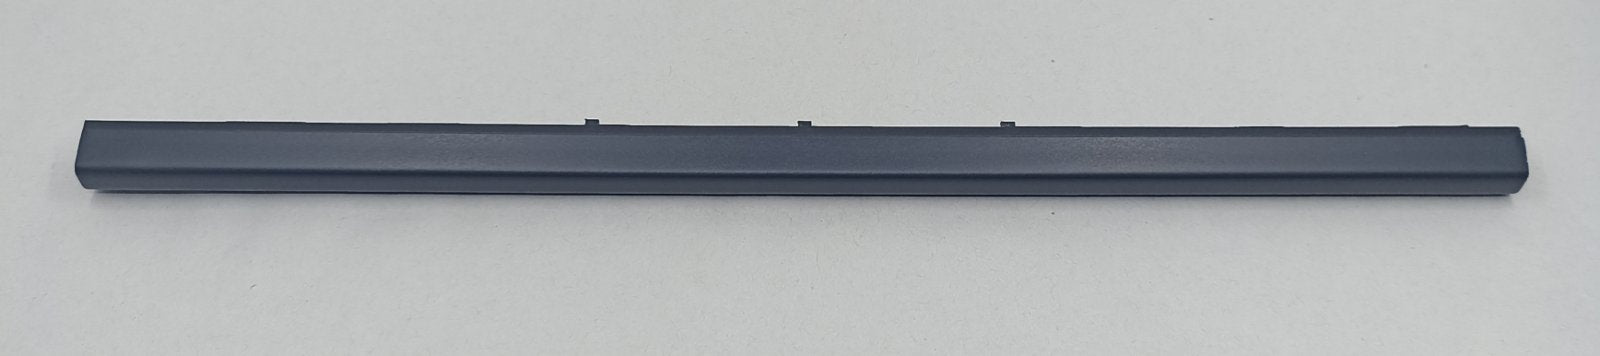 Replacement Hinge Cover for Lenovo 320-15IKB WL